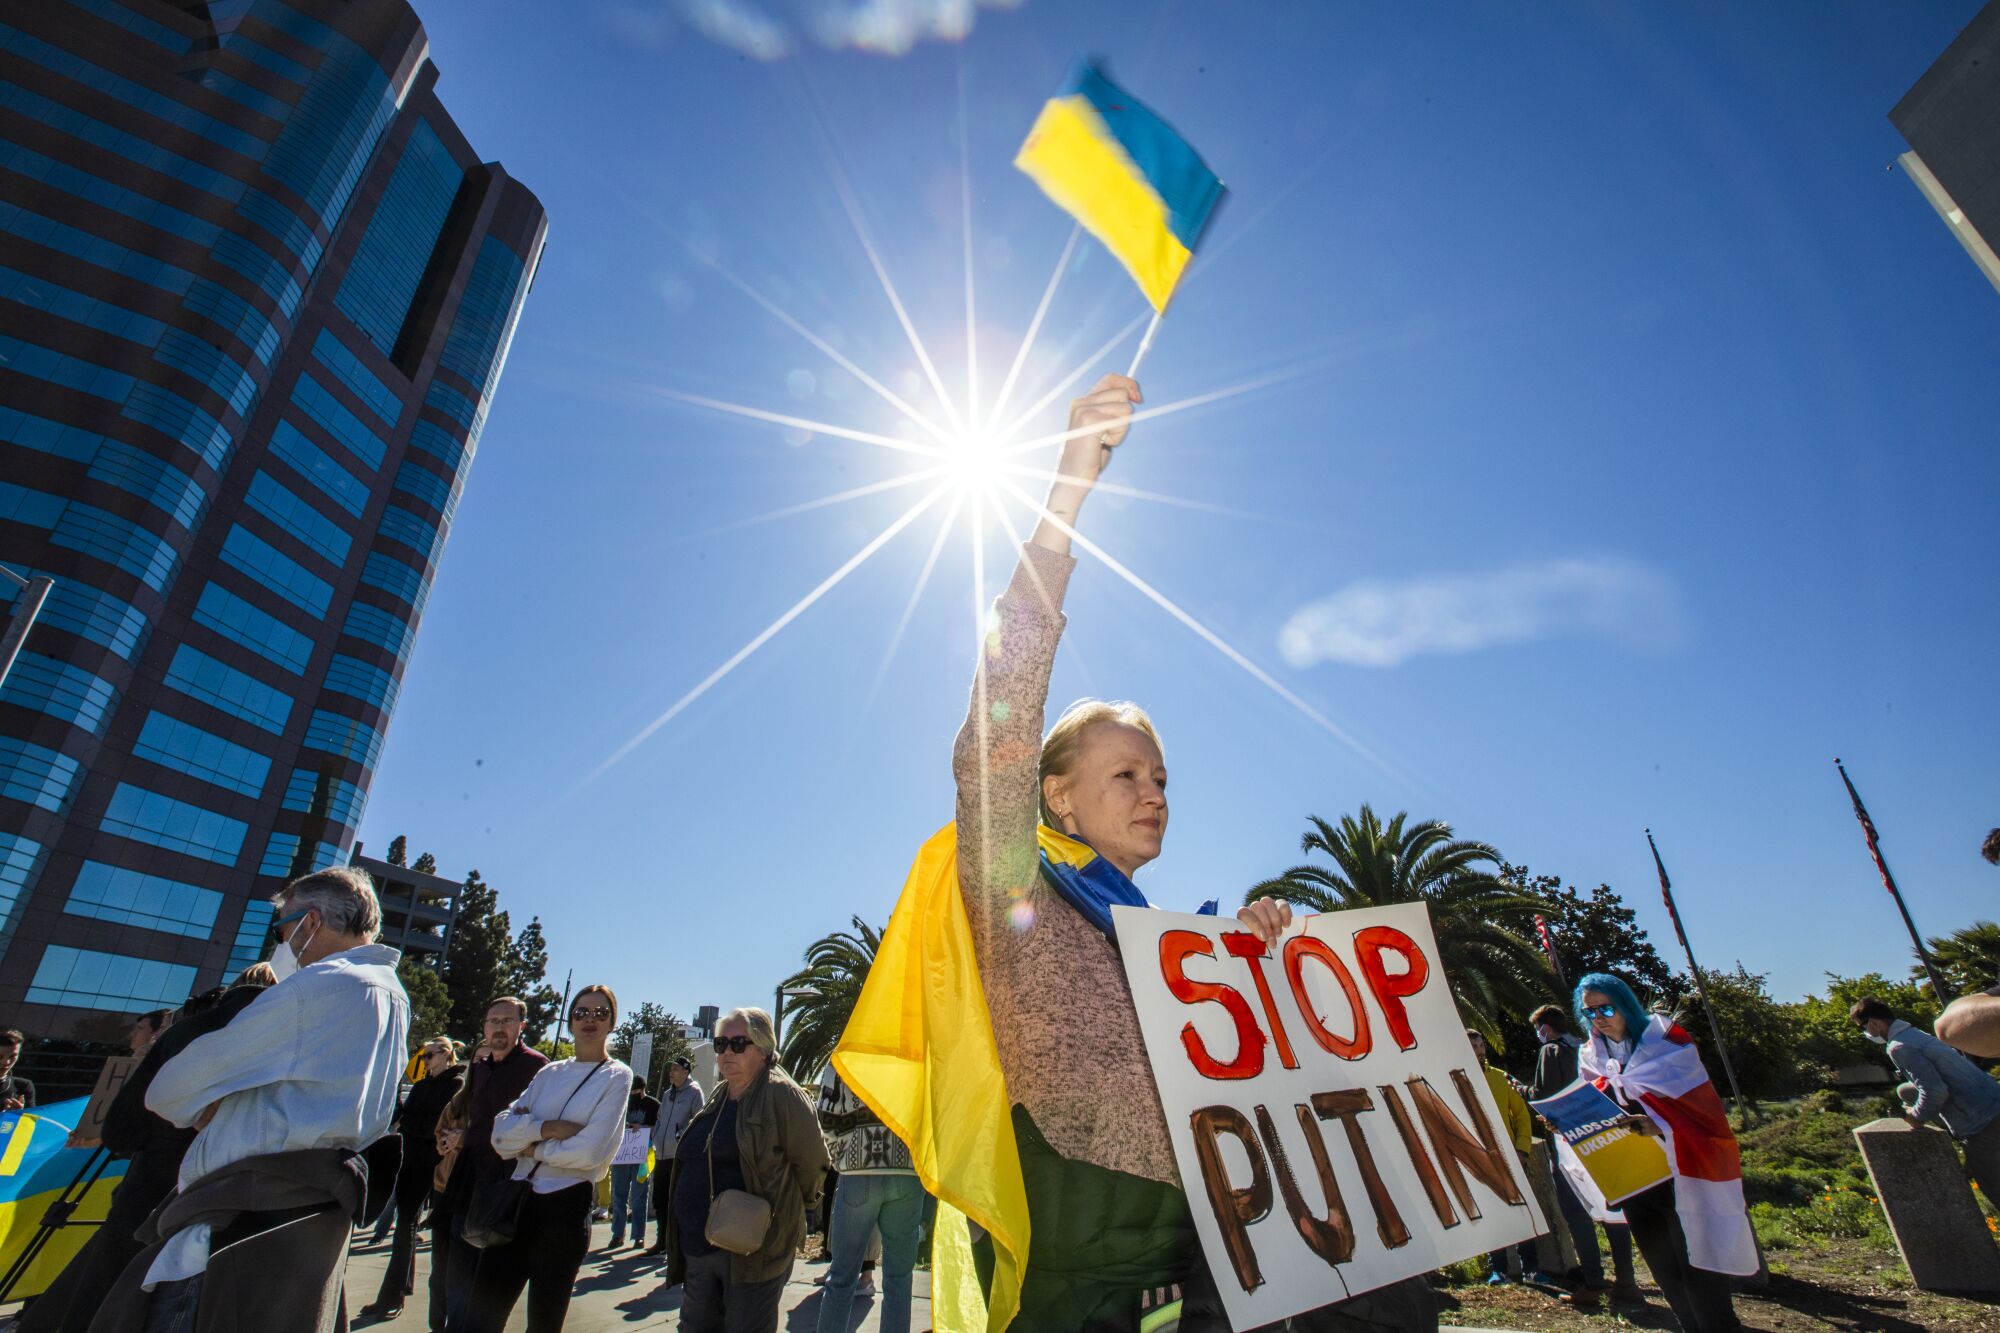 Kseniia Korniienk demonstrates along with over 100 members of the Ukranian community at the Federal Building in Westwood